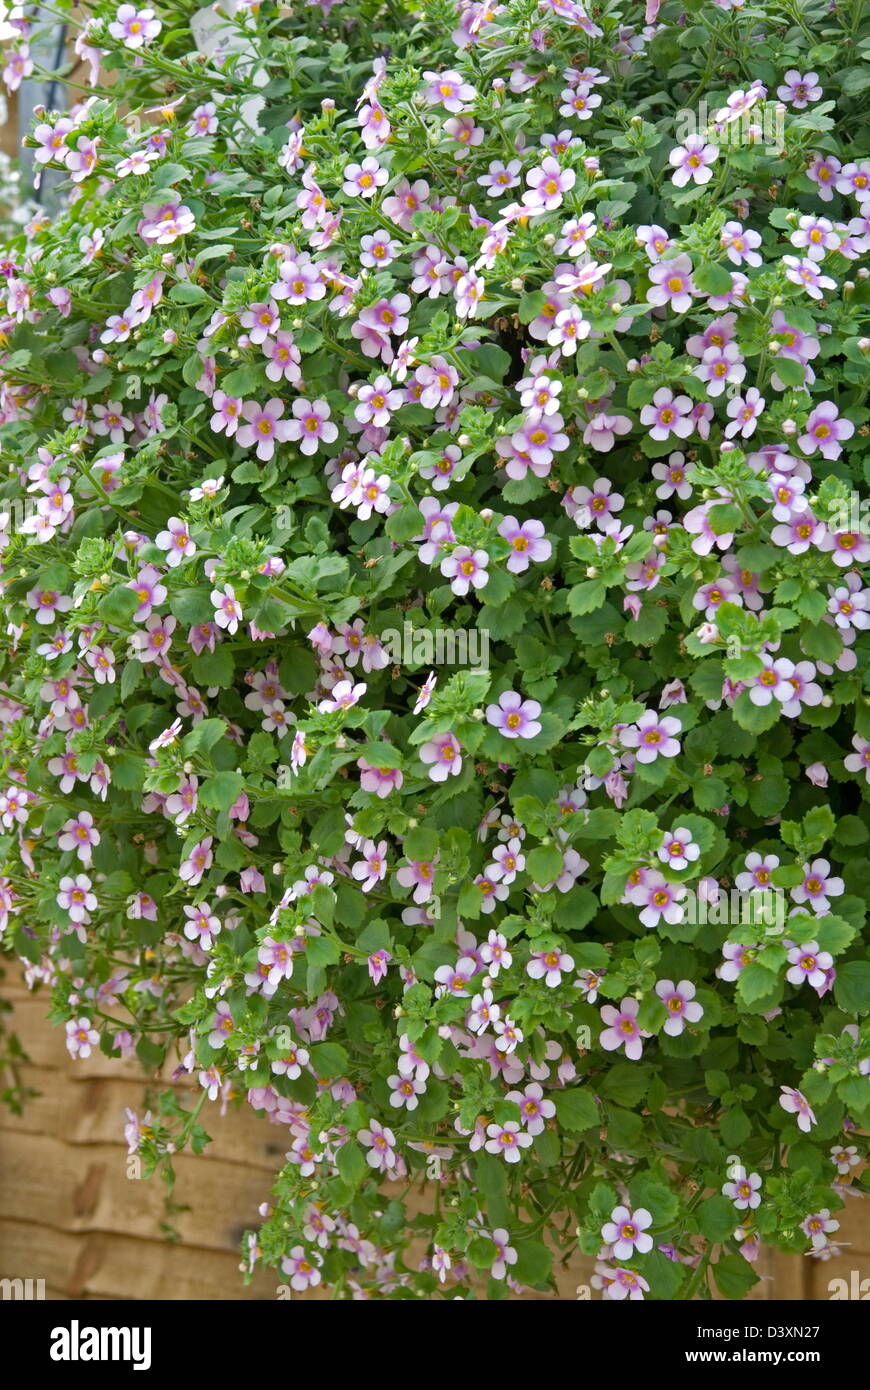 Bacopa 'Scopia' 'Great Pink Eye'. Date: 03.11.2008 Ref: ZB907 123496 0076 COMPULSORY CREDIT: Photos Horticultural/Photoshot Stock Photo